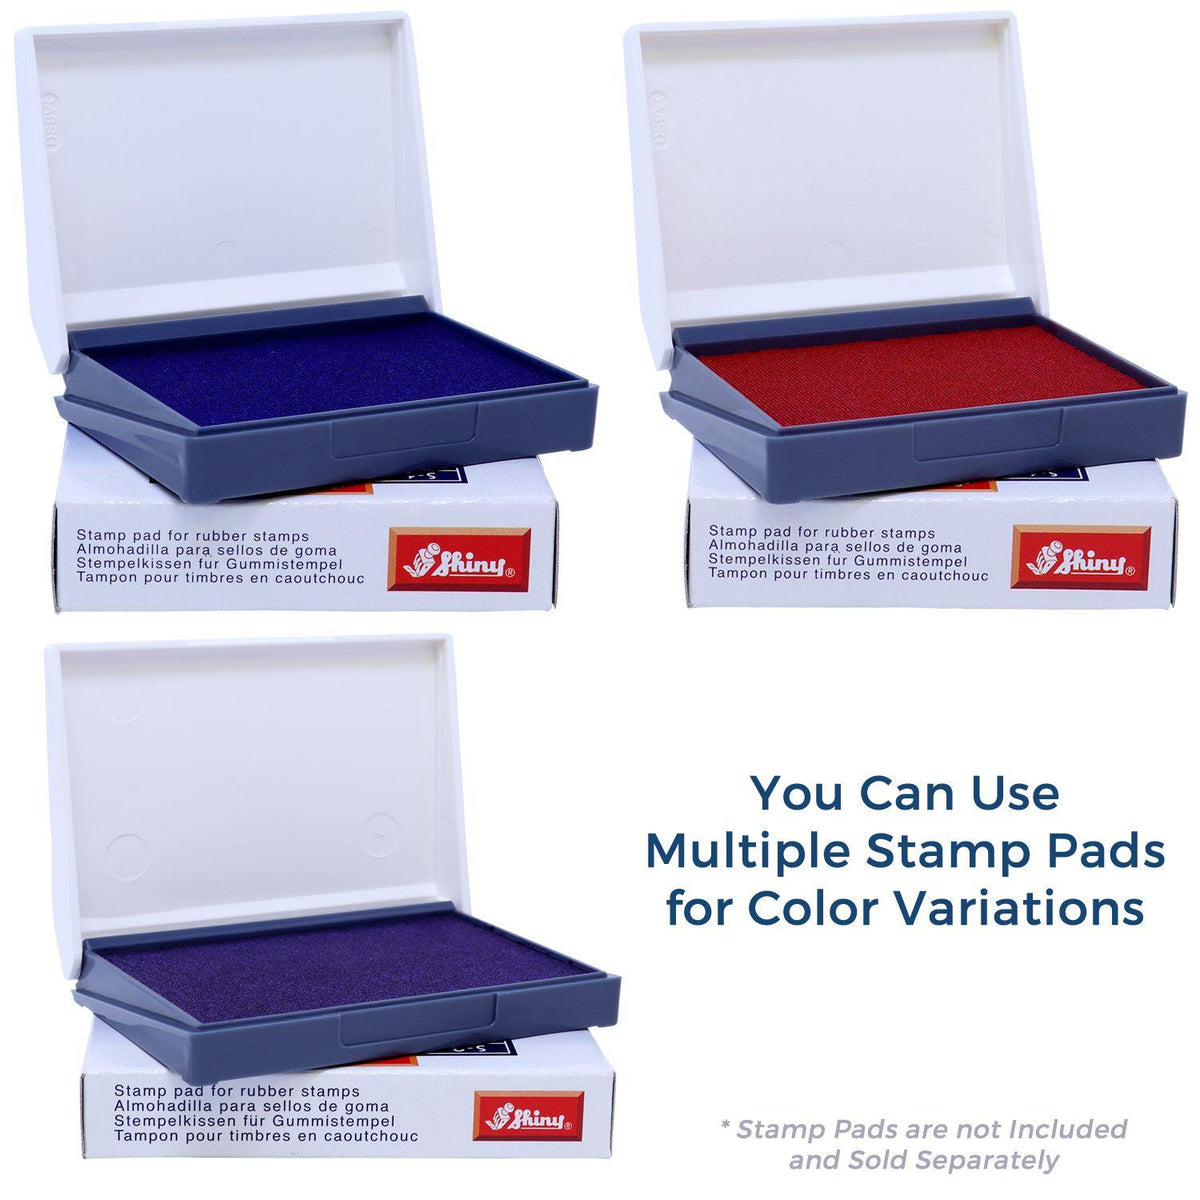 Stamp Pads for Humana Rubber Stamp Available